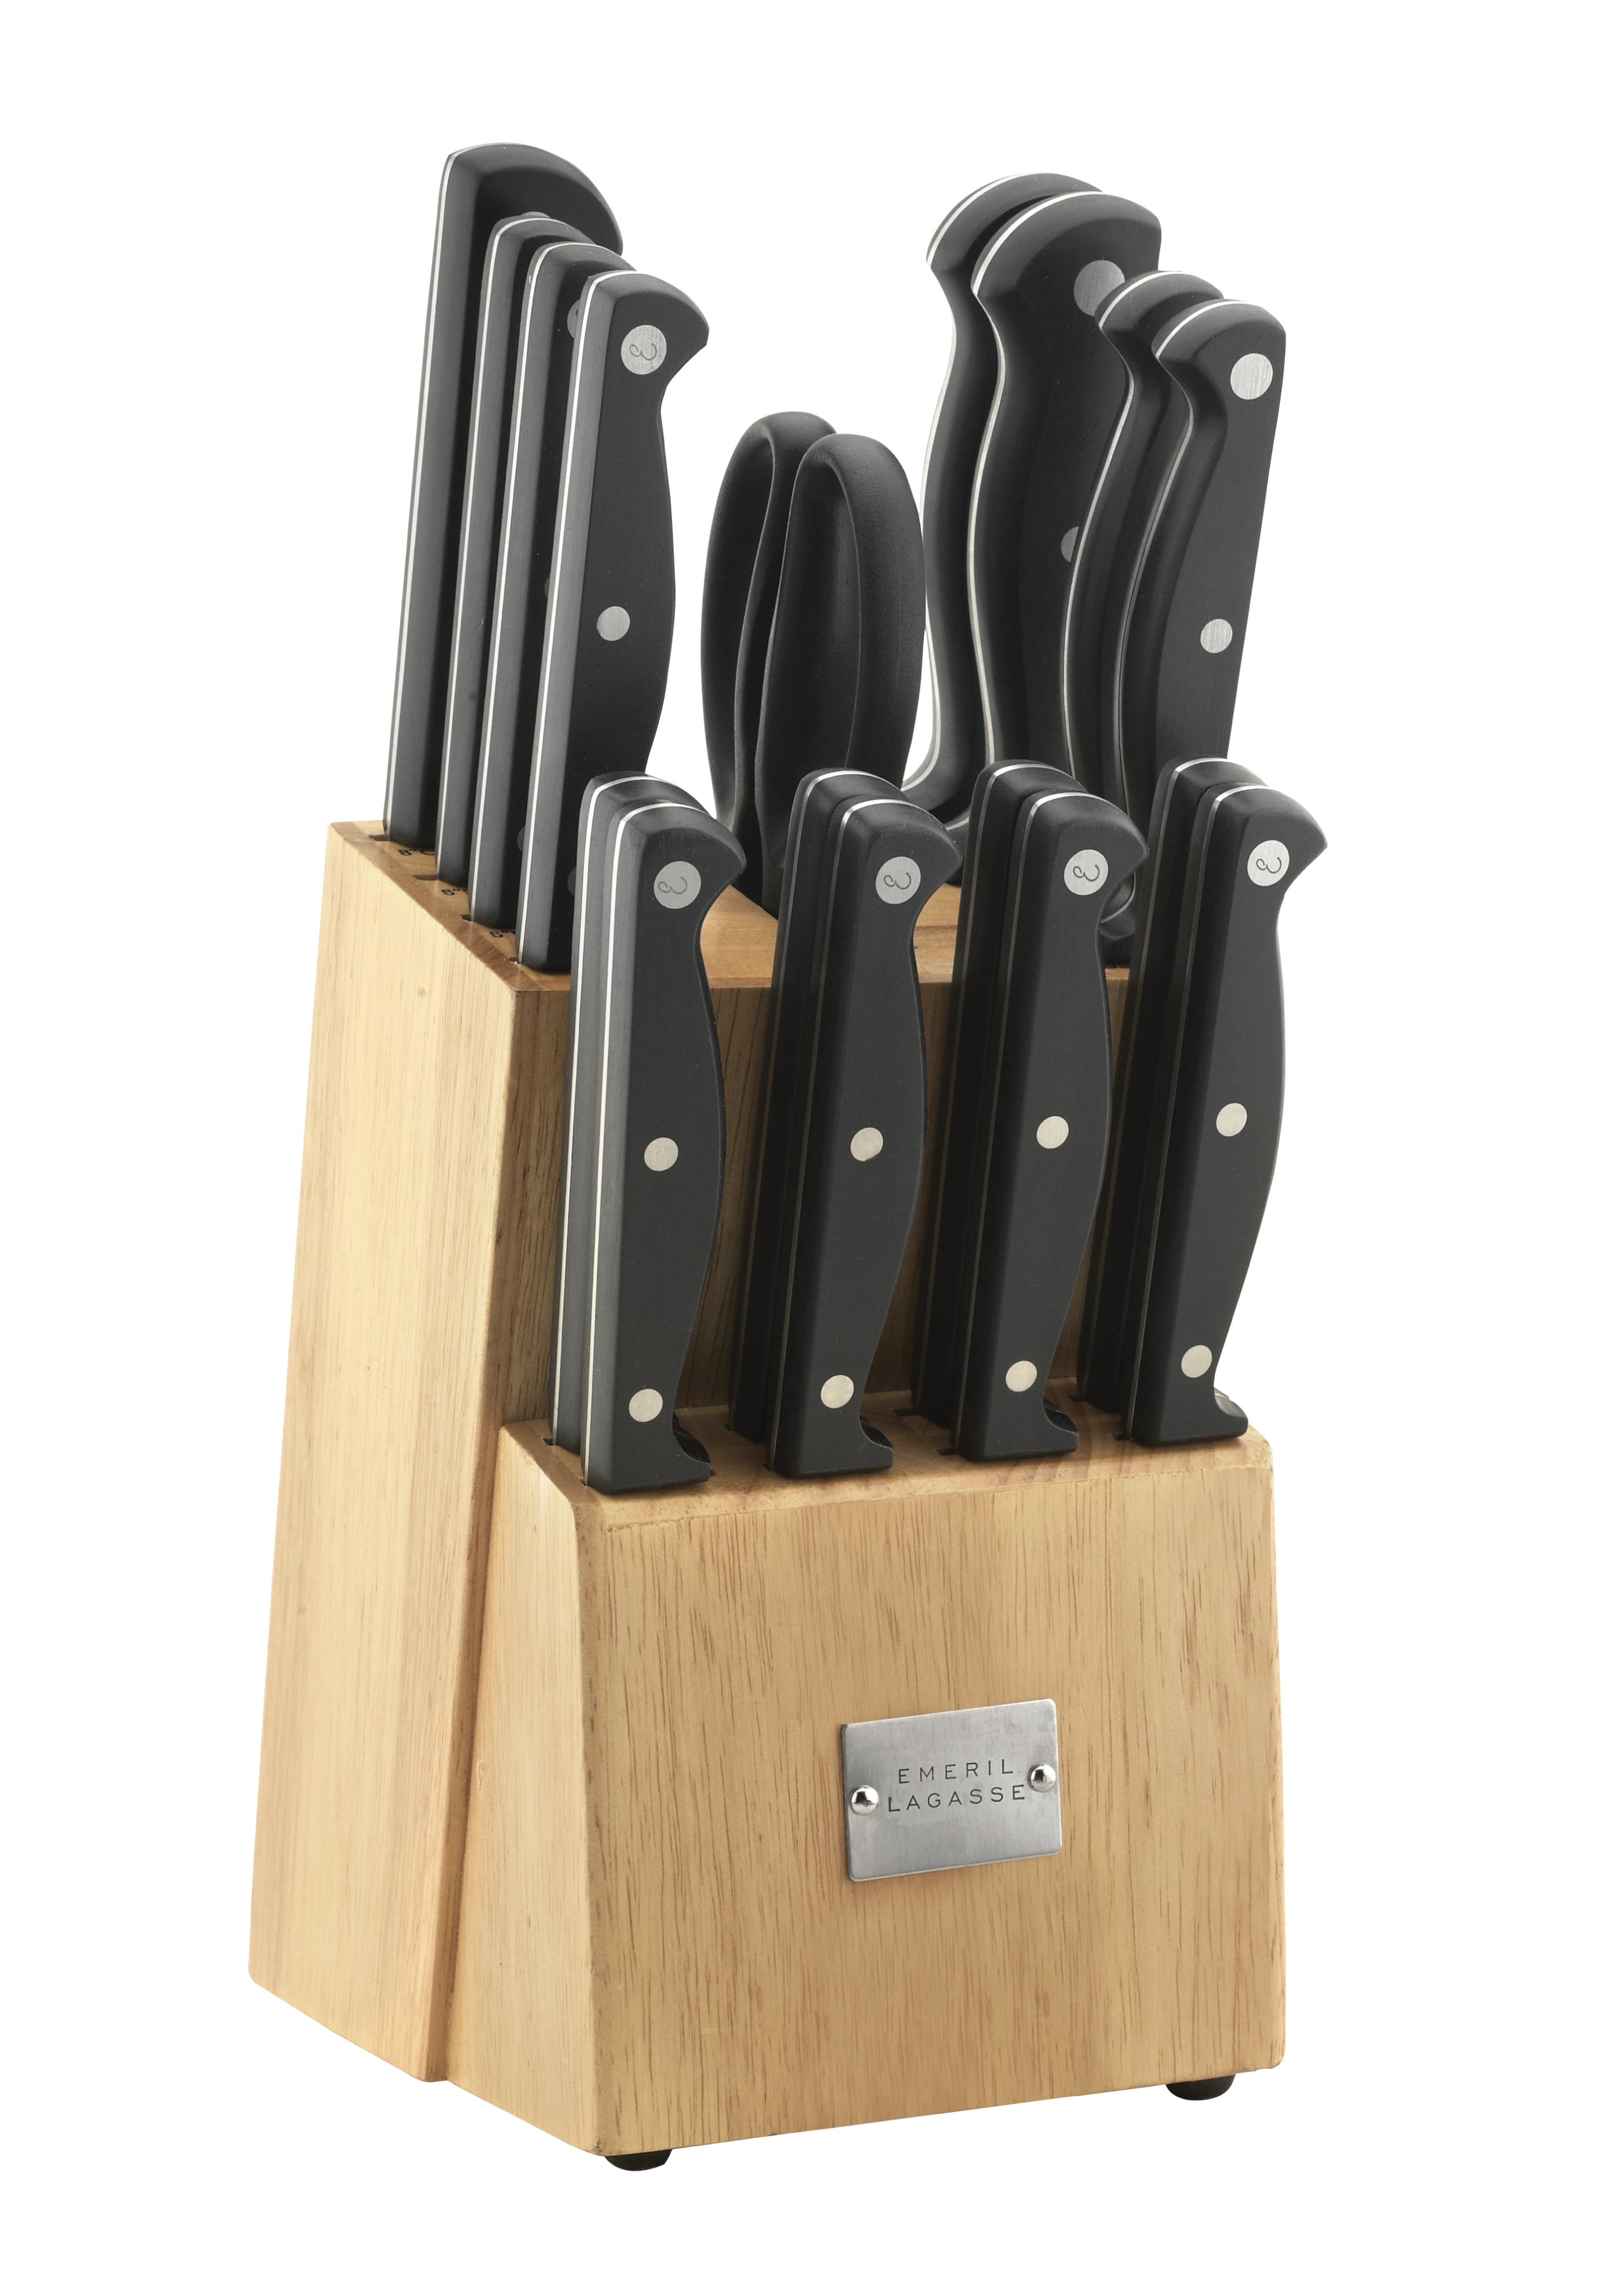 Class Action Lawsuit Says Emeril Lagasse Knives are Counterfeit